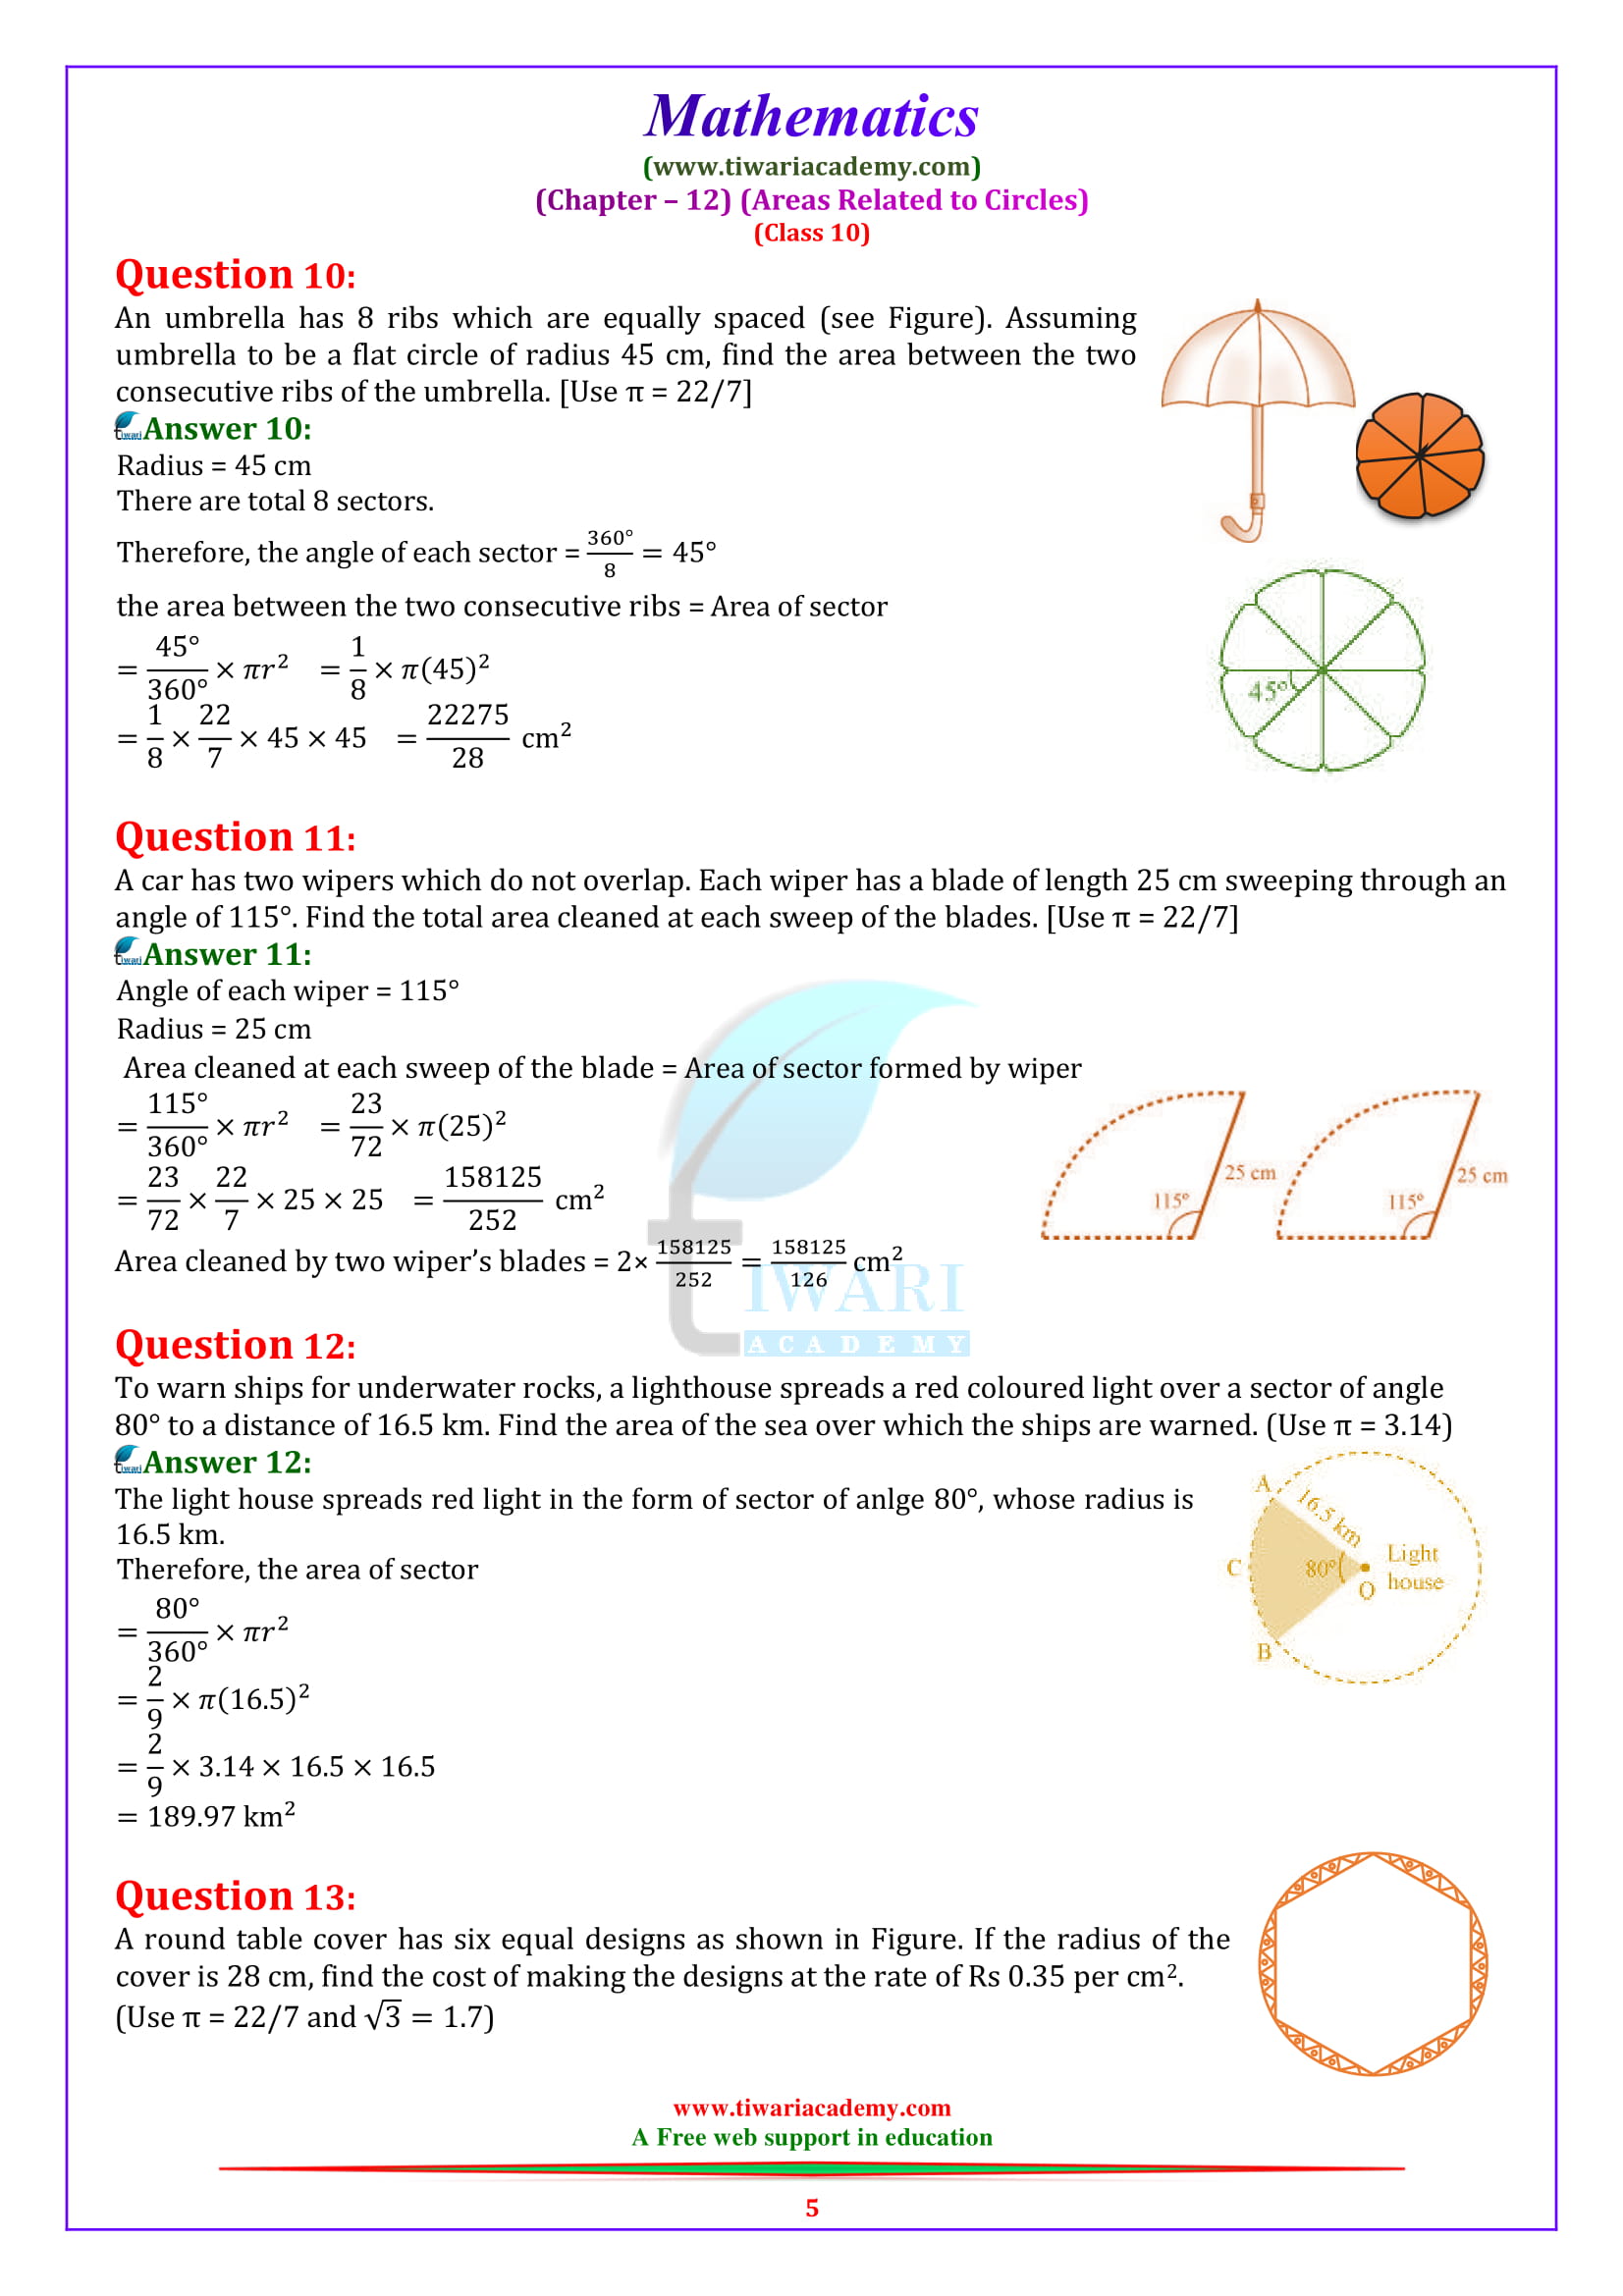 10 Maths chapter 12 exercise 12.2 solutions in english